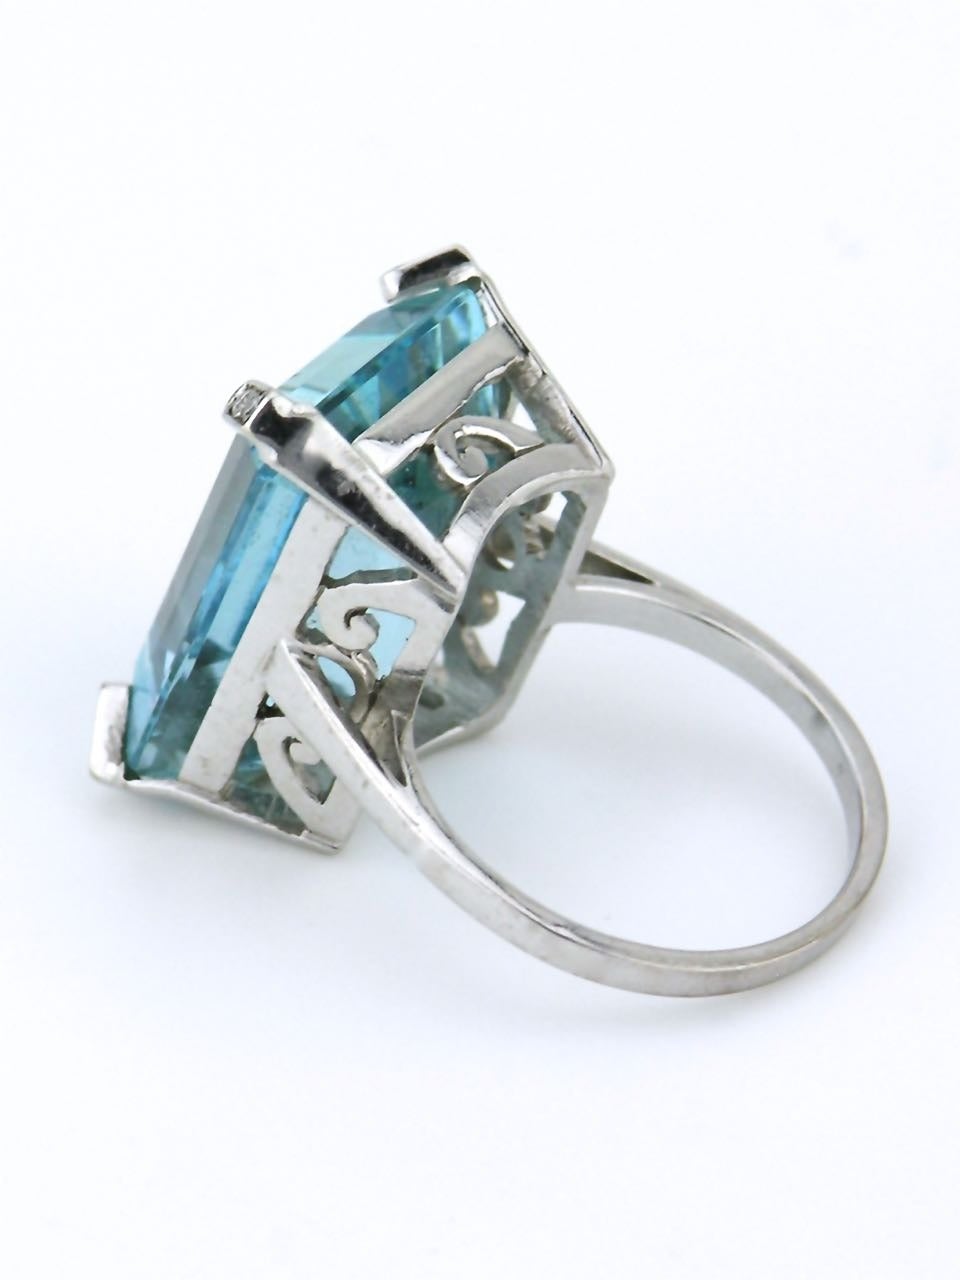 Aquamarine Diamond Gold Cocktail Ring In Good Condition For Sale In Potts Point, New South Wales